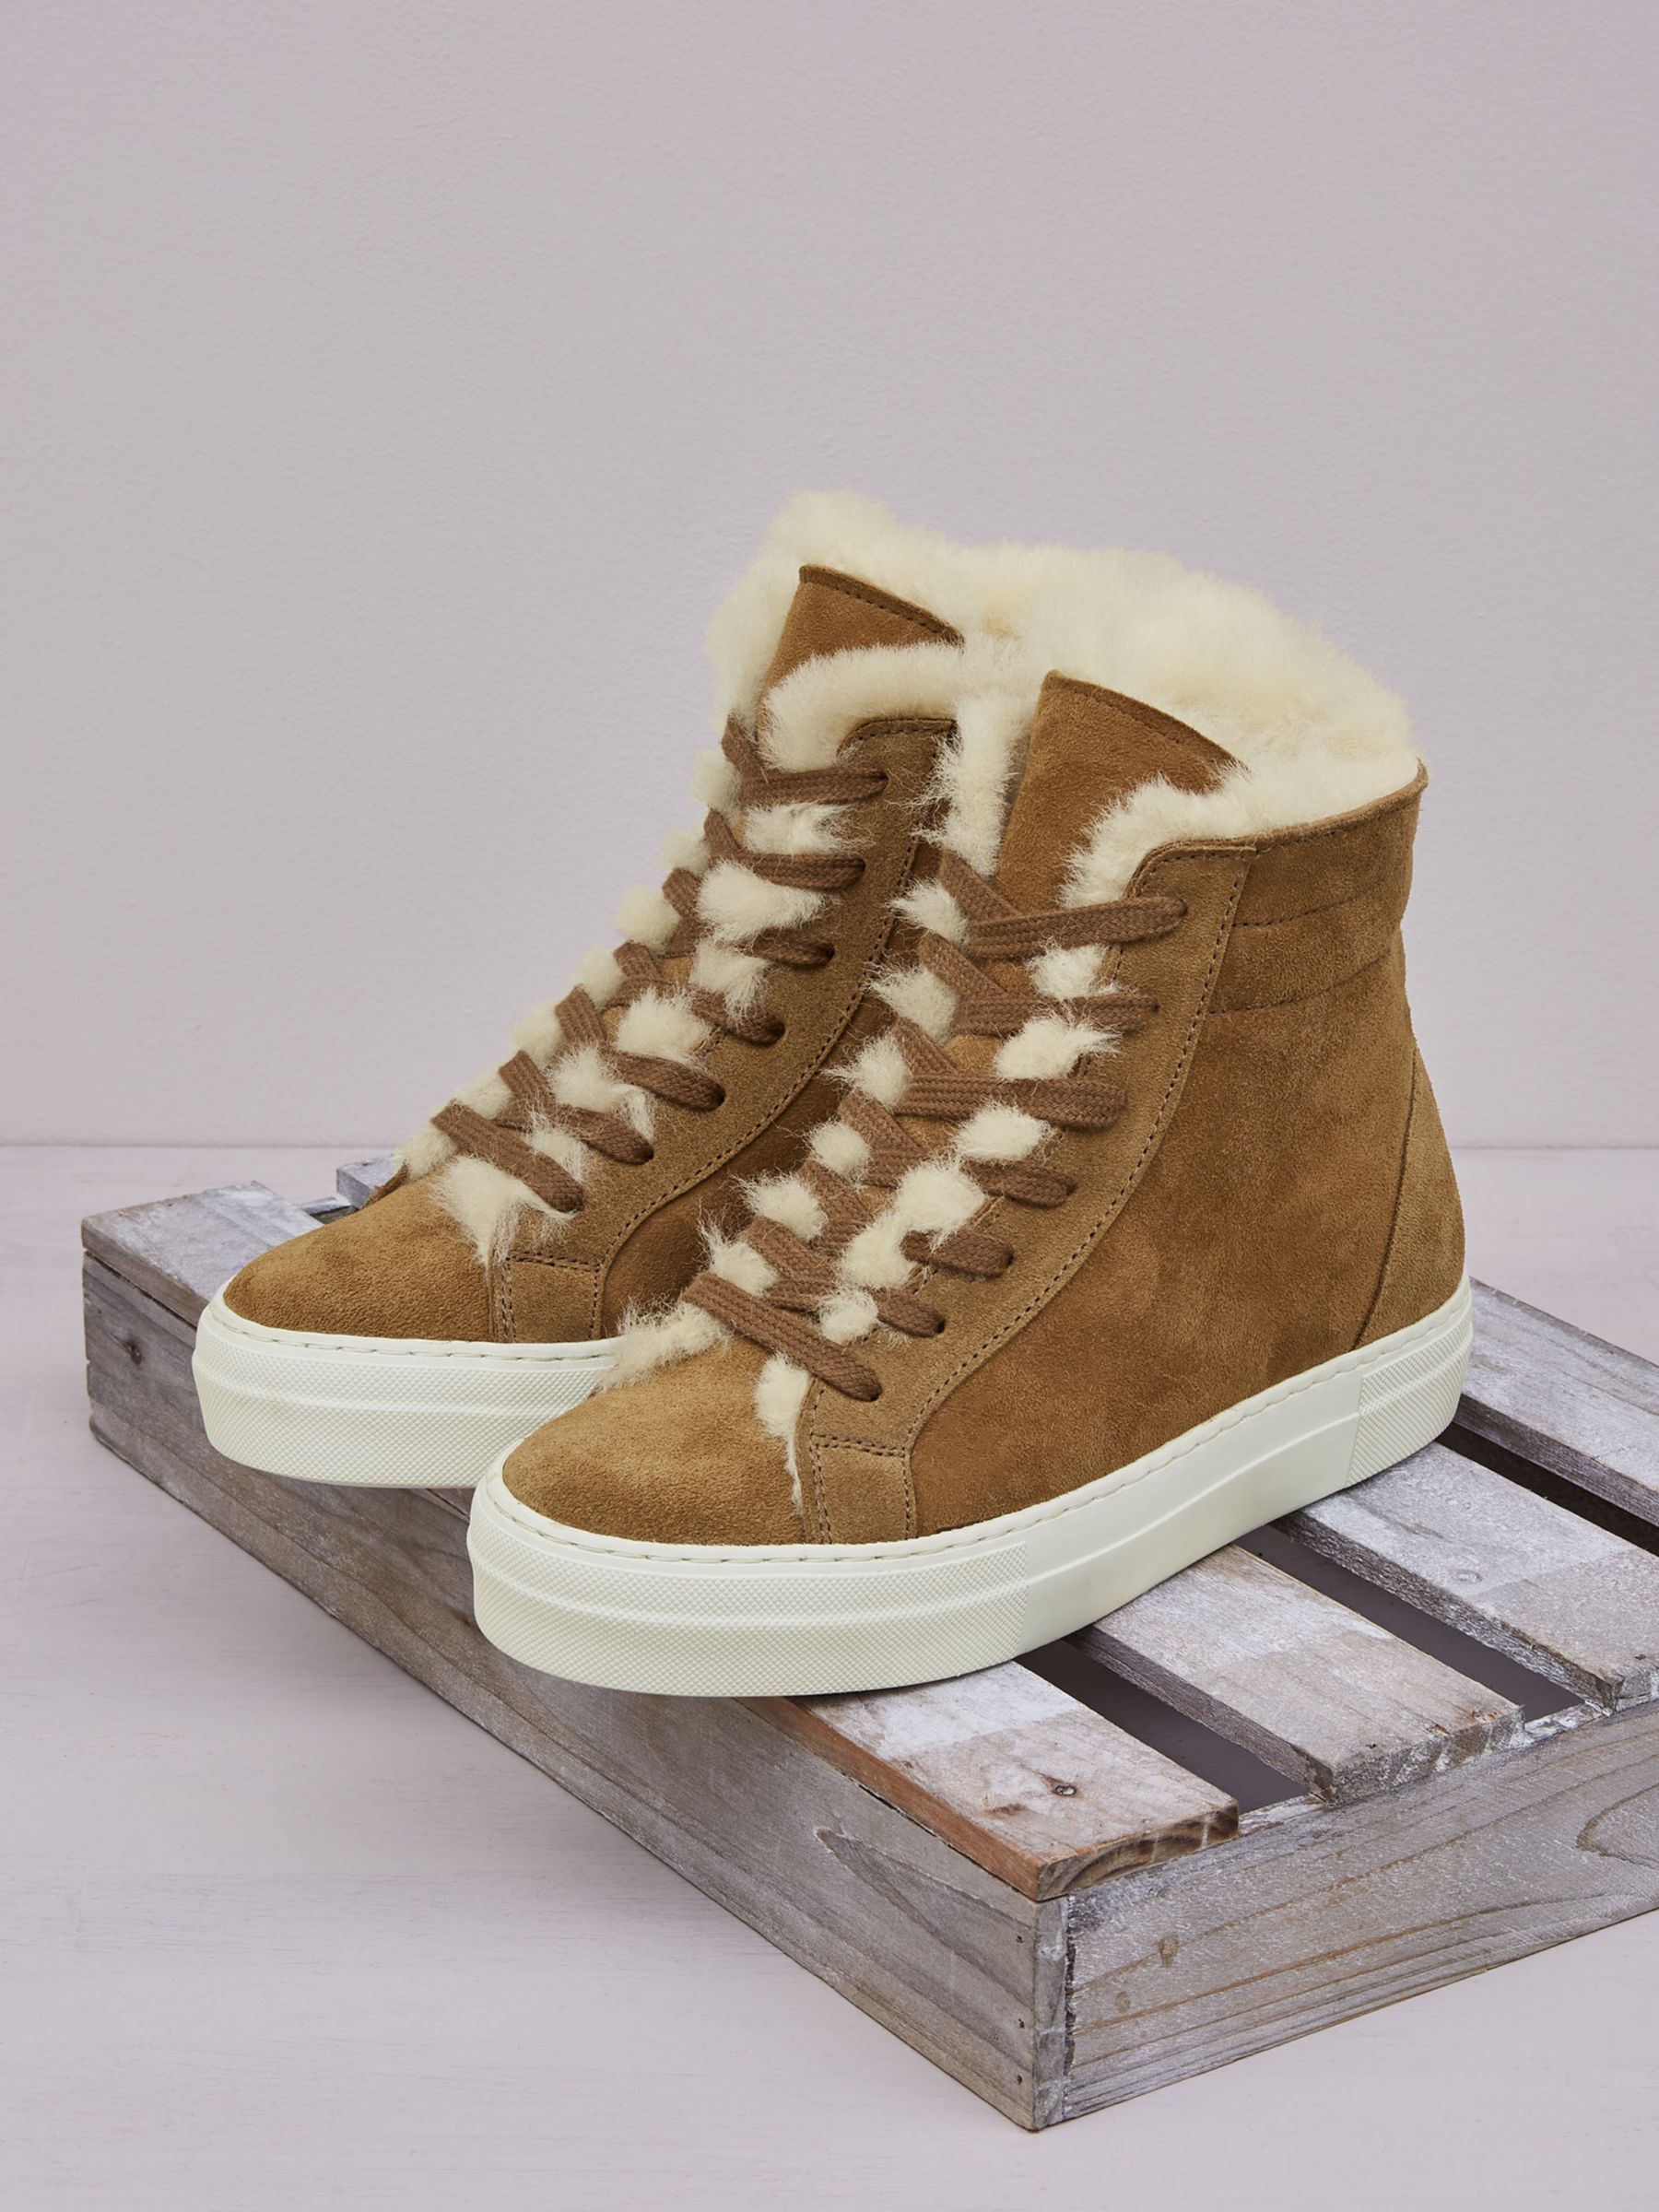 Celtic & Co. Sheepskin High Top Trainers, Whisky, 3